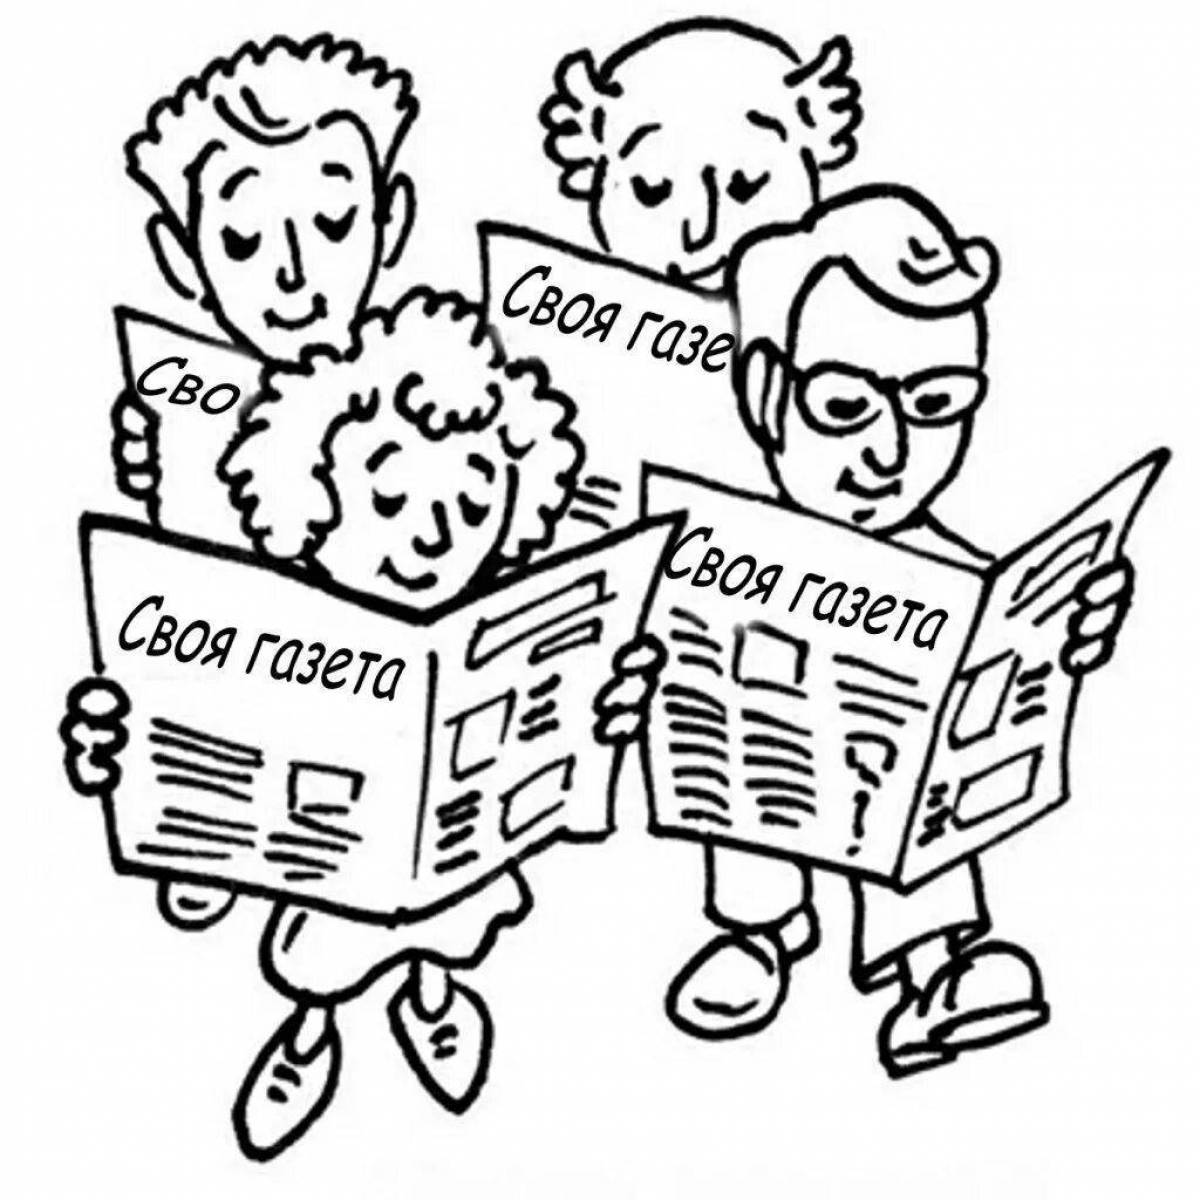 Creative newspaper coloring book for kids